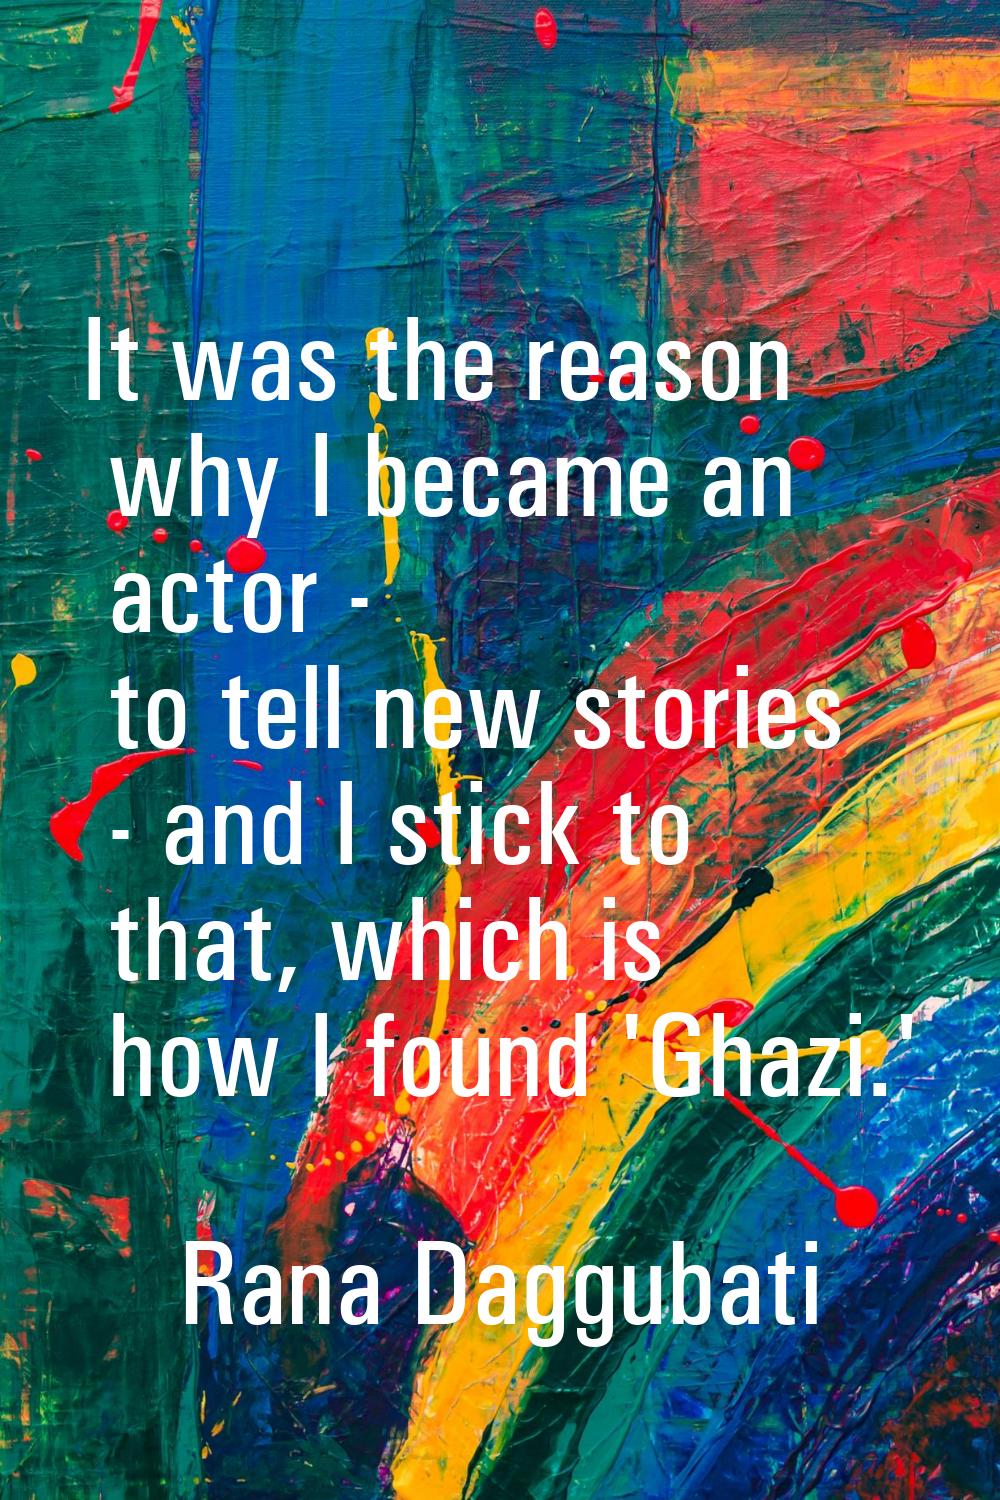 It was the reason why I became an actor - to tell new stories - and I stick to that, which is how I